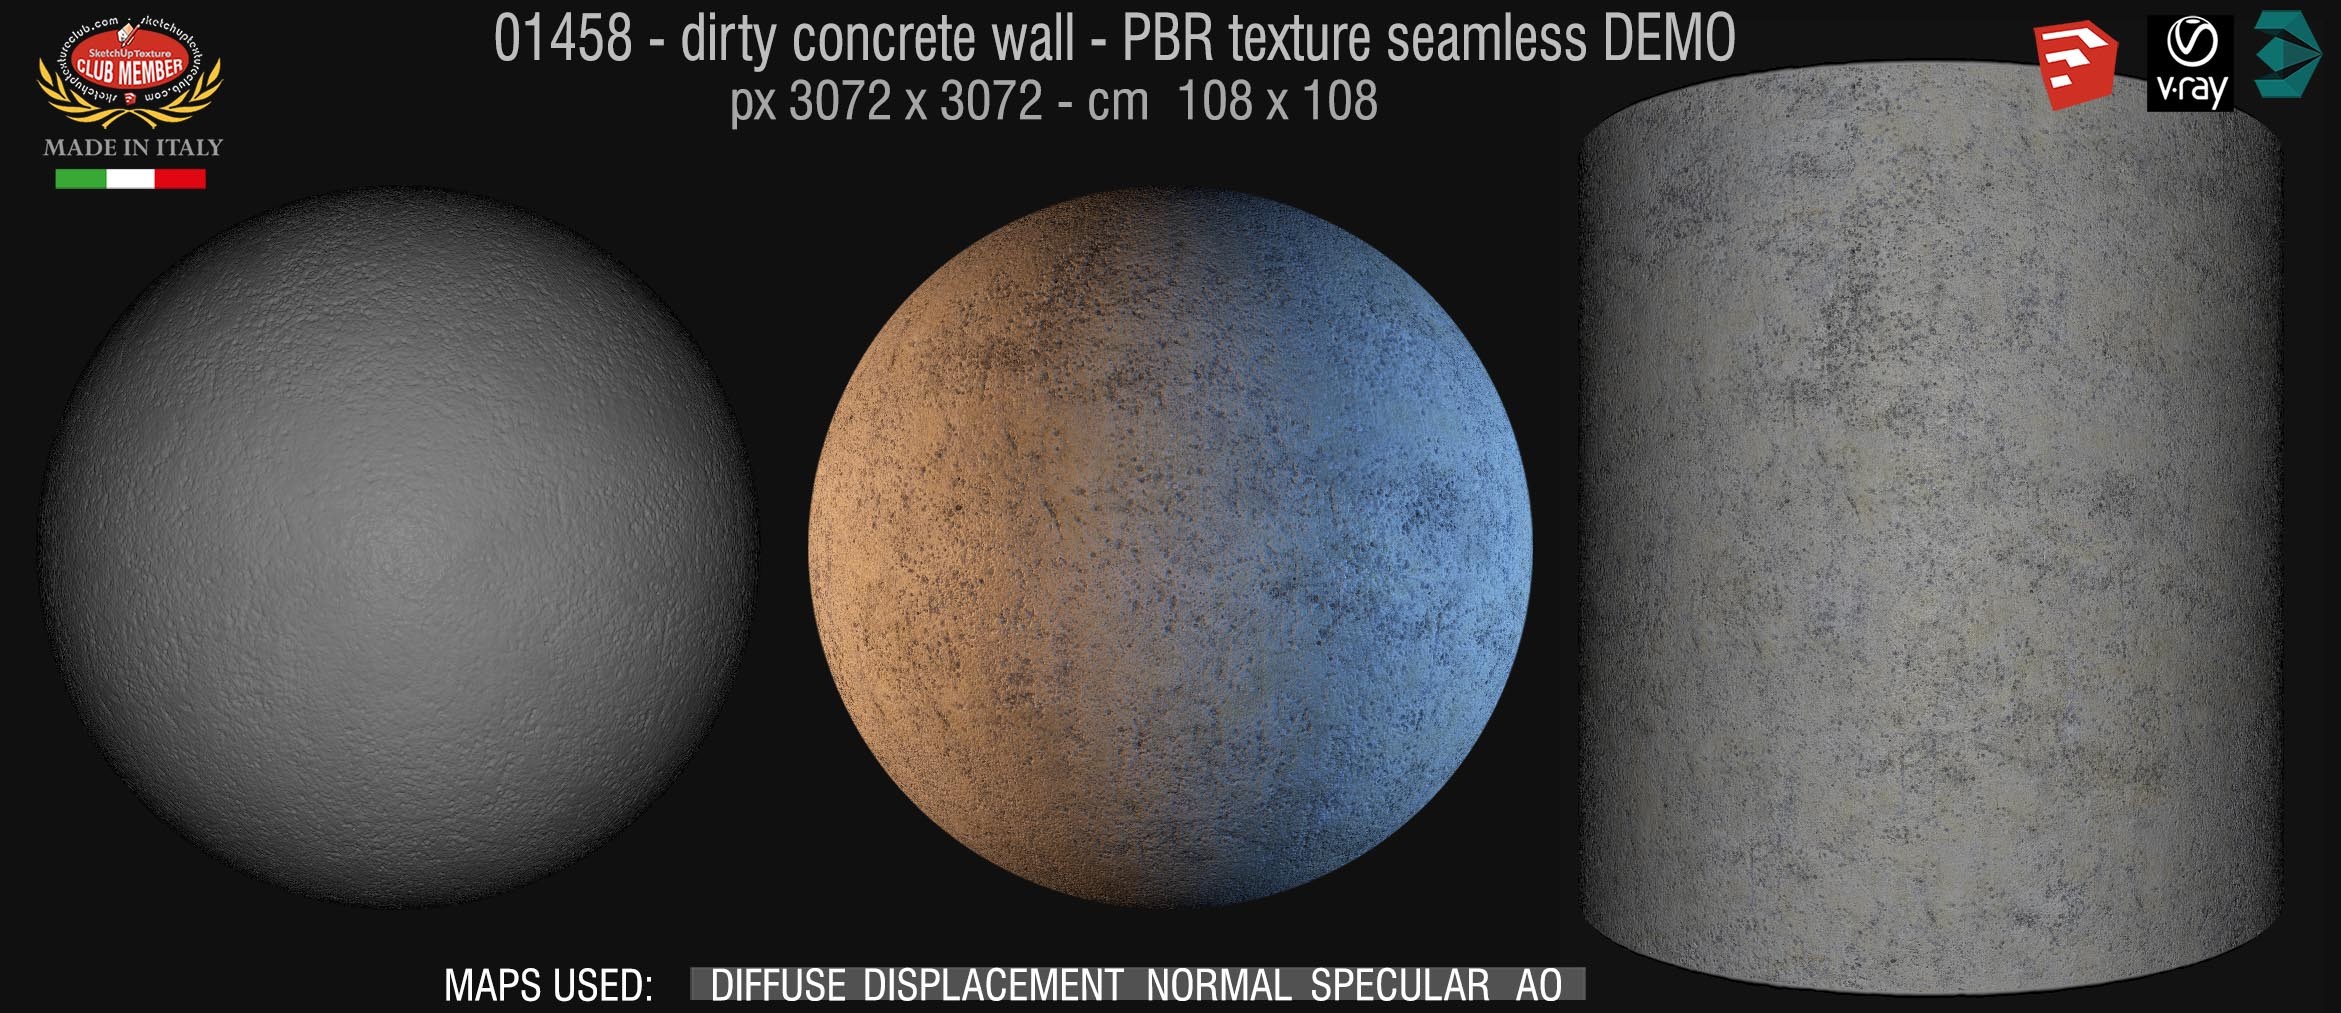 01458 Concrete bare dirty wall PBR texture seamless DEMO